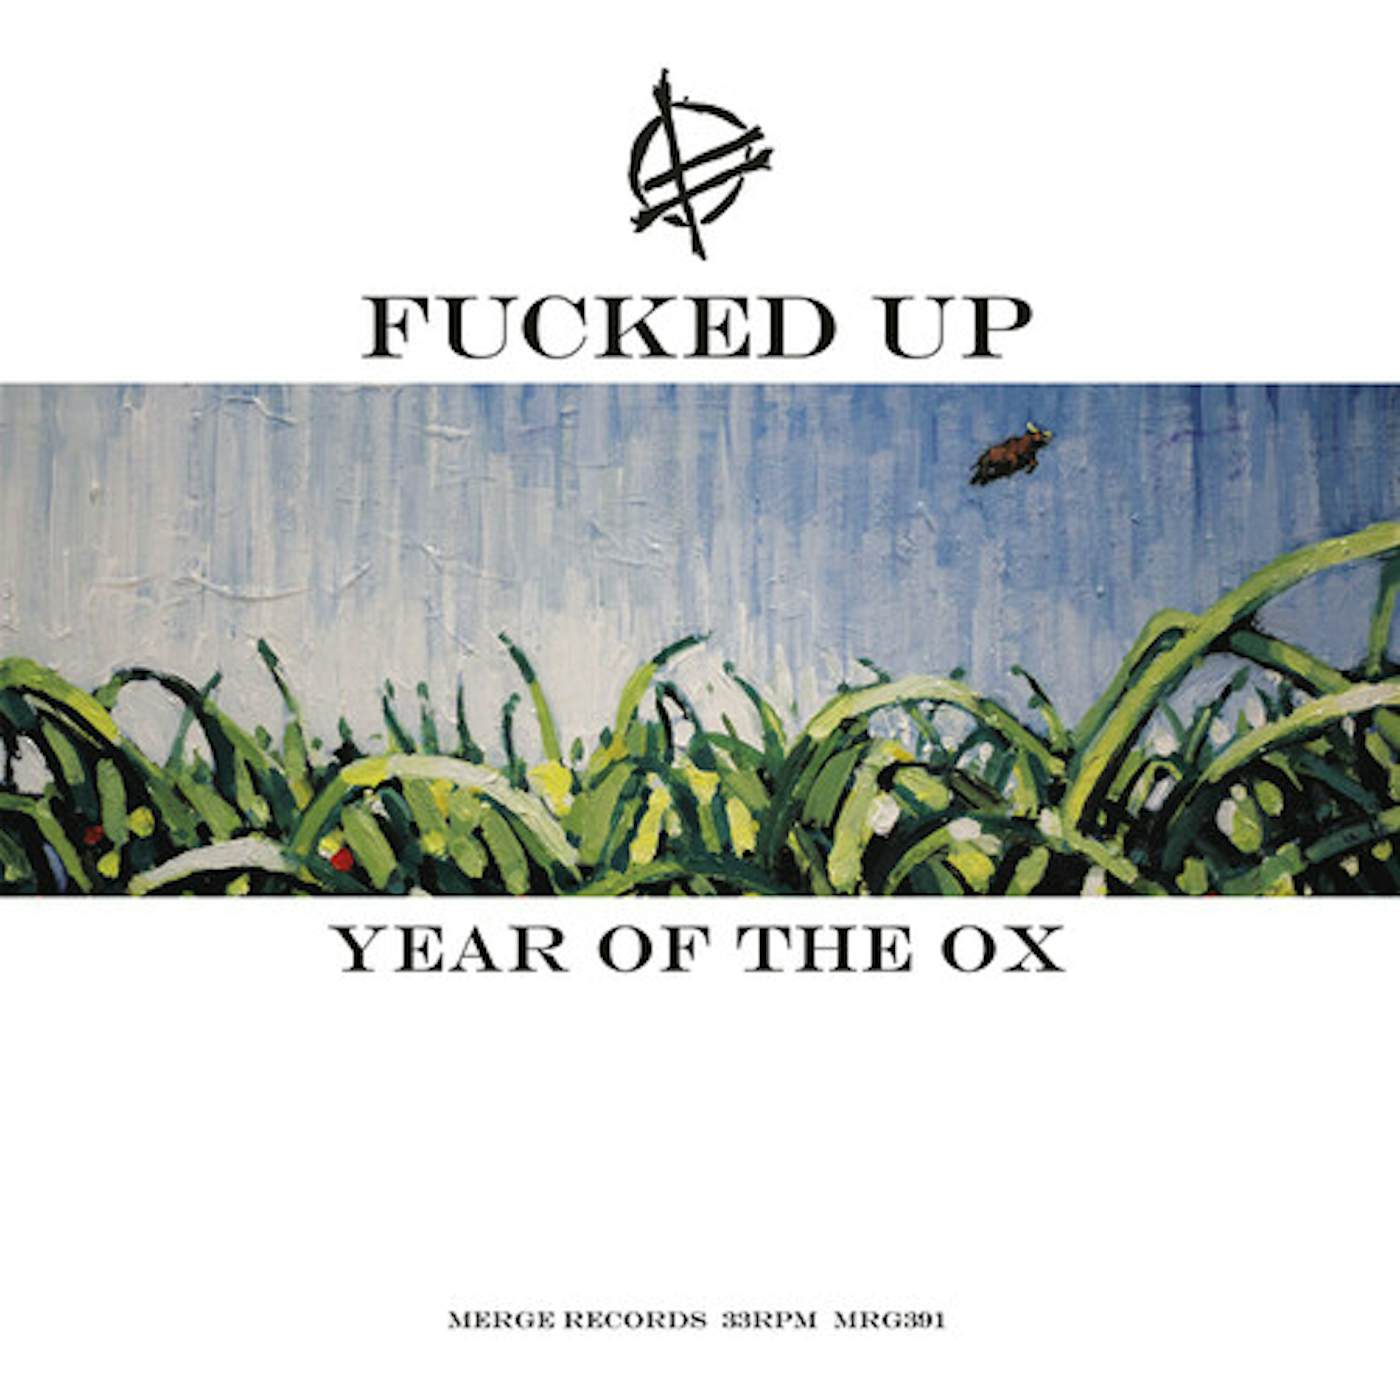 Fucked Up Year of the Ox Vinyl Record